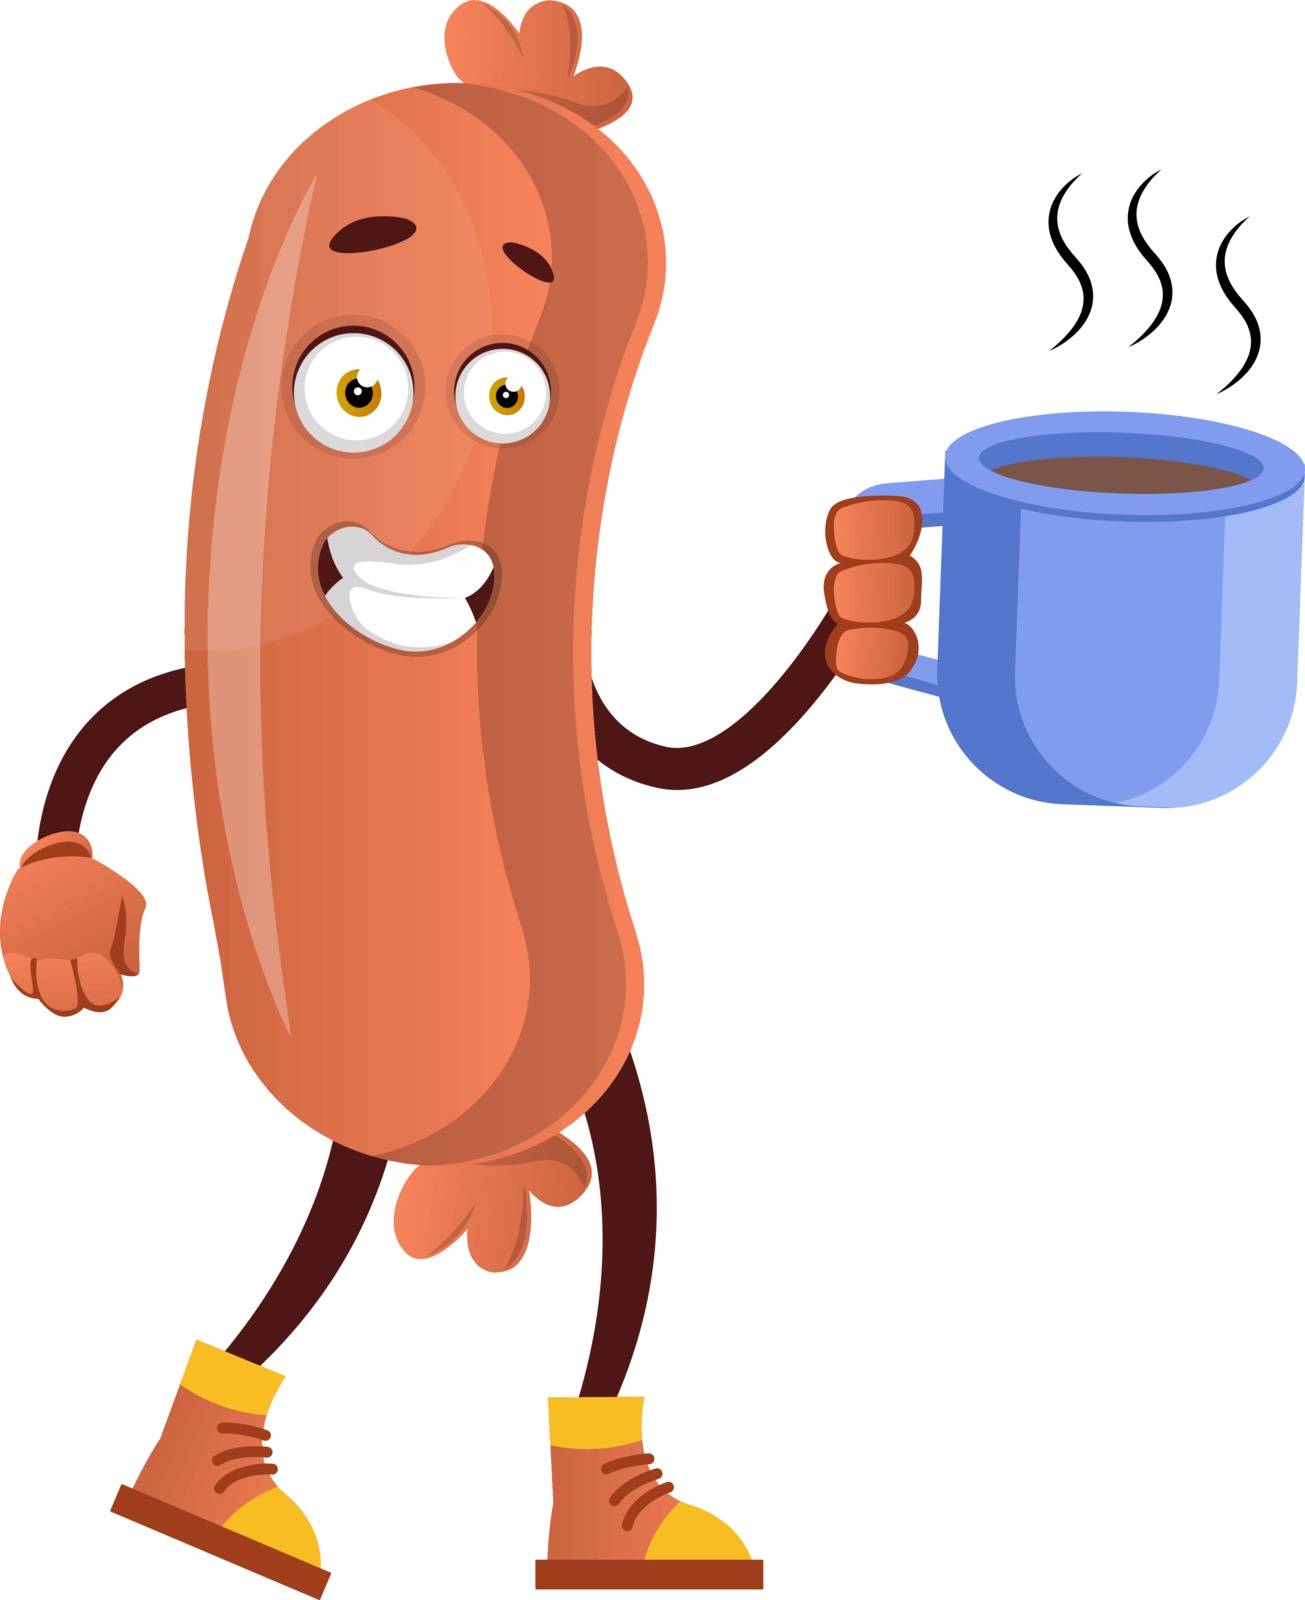 Sausage with coffee, illustration, vector on white background.